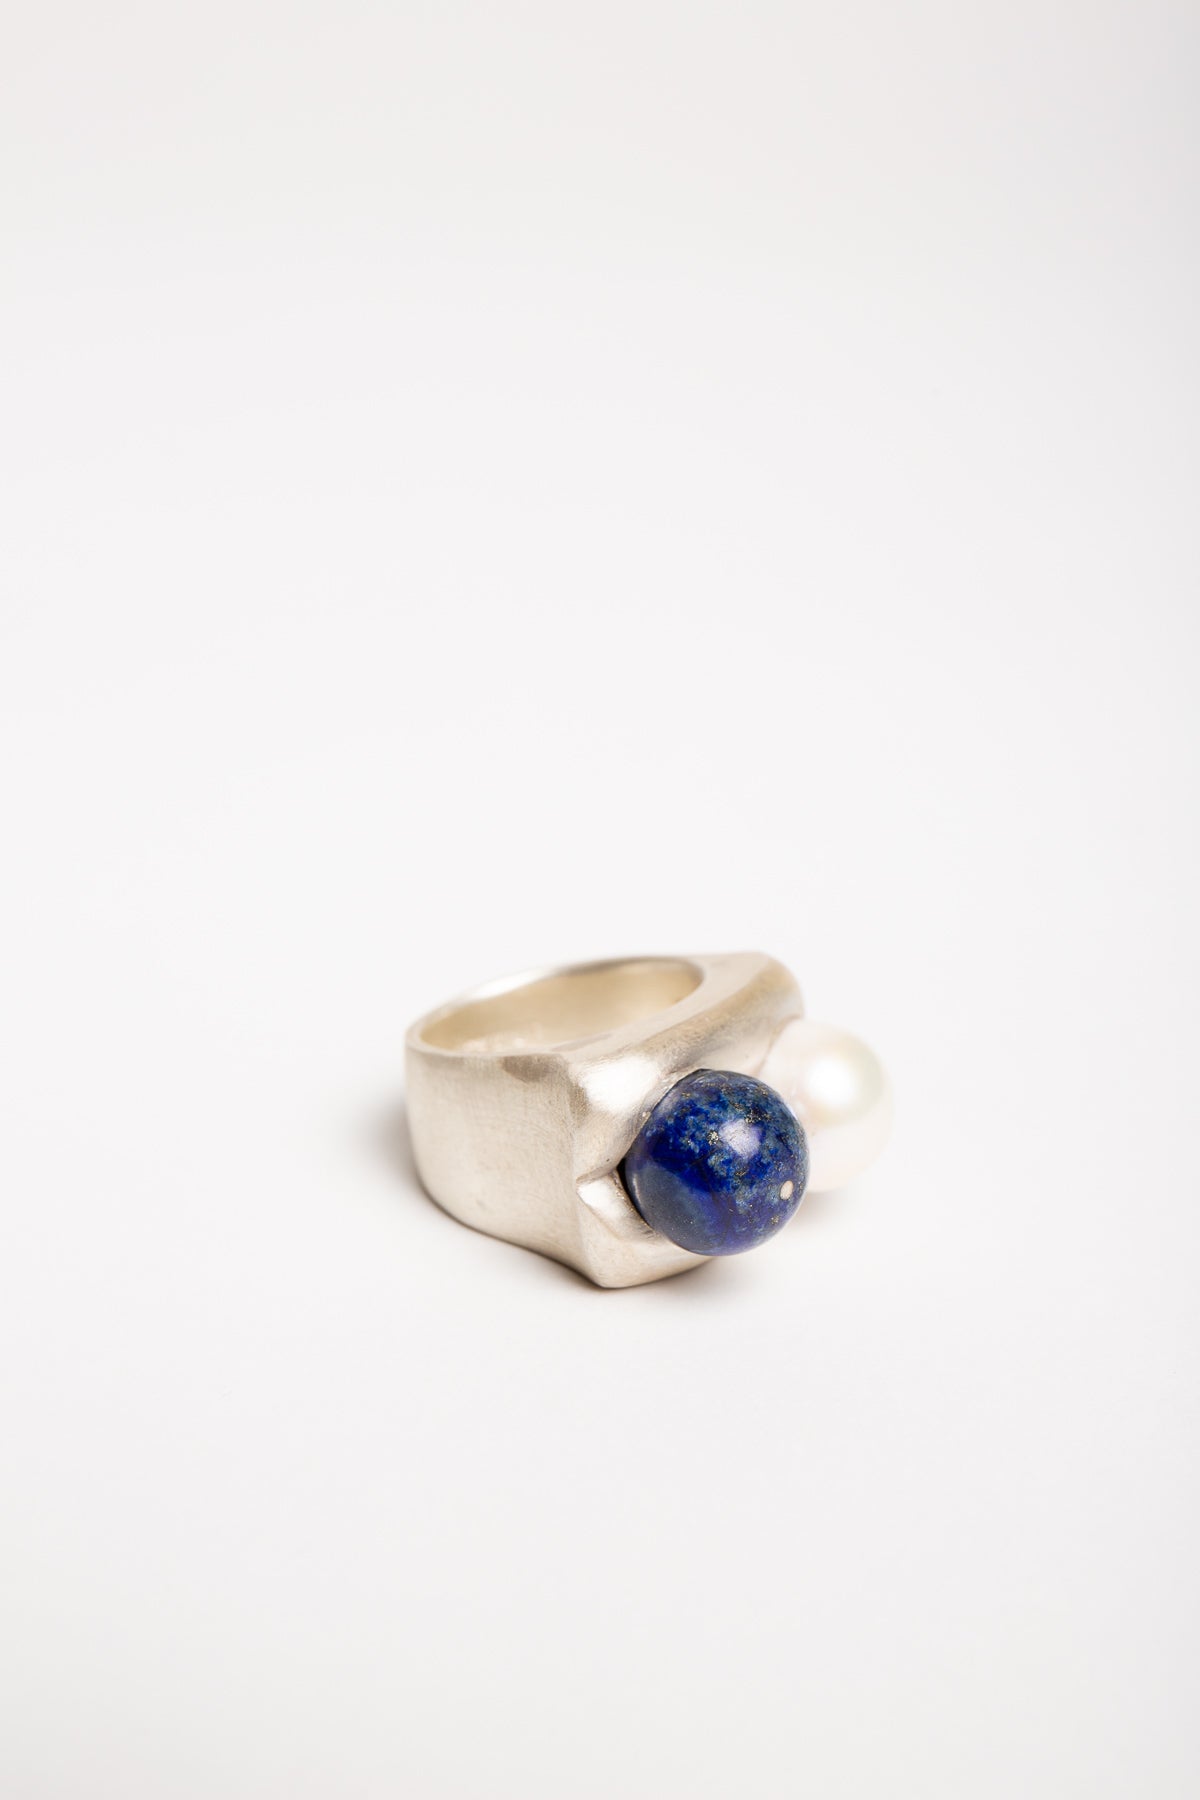 TRIN-KET | STERLING SILVER FRESH WATER PEARL LAPIS RING